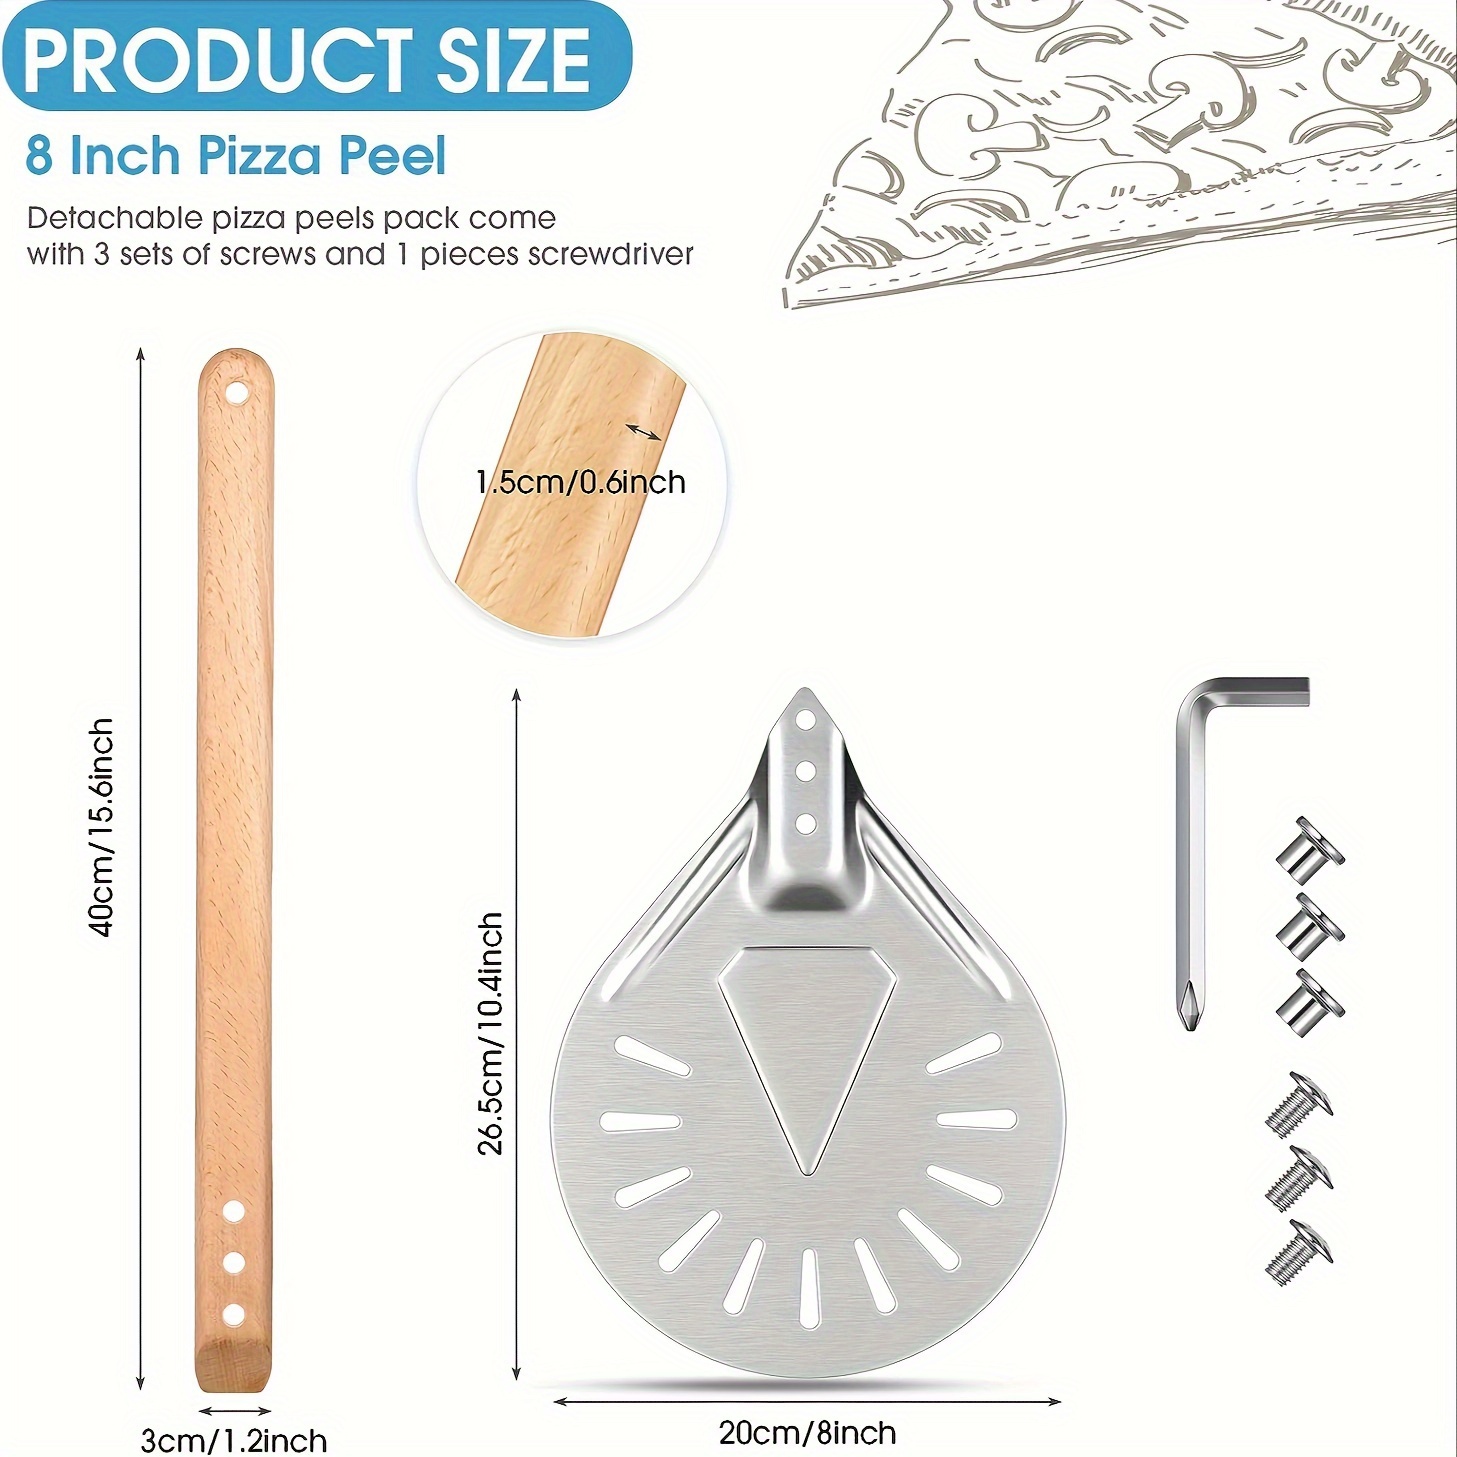 1pc pizza peel turner turning pizza peel round aluminum perforated pizza peel turner oval shape detachable wooden handle pizza paddle for baking homemade pizza bread